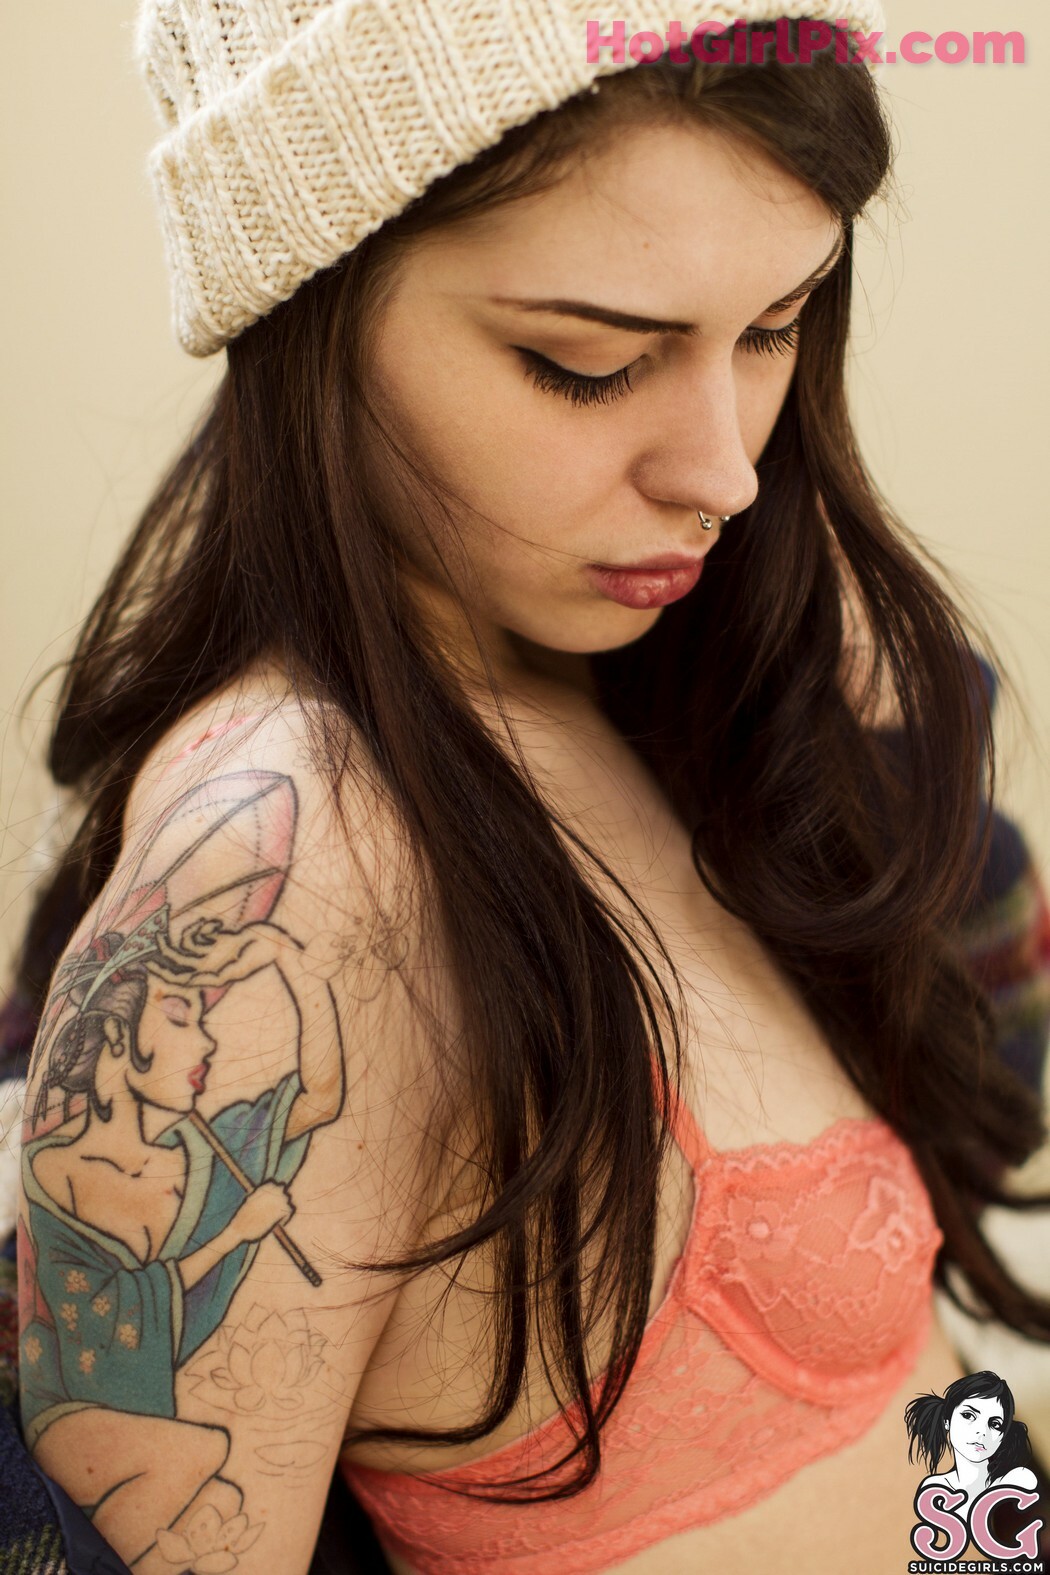 [Suicide Girls] Arwen - Wrapped in Sun